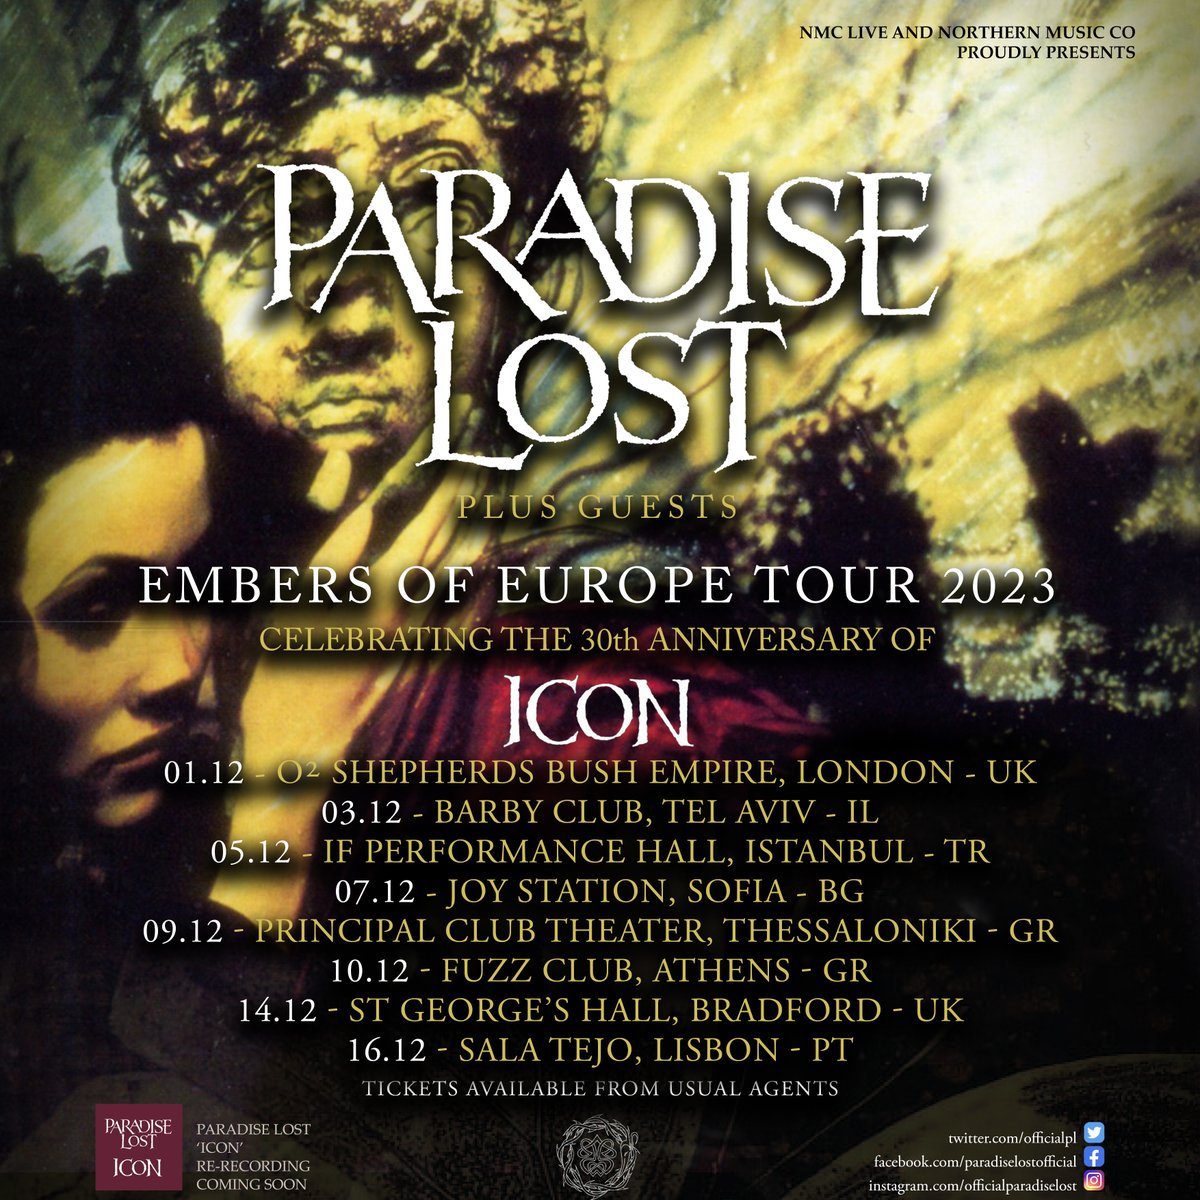 Embers of Europe Tour NEW DATES ANNOUNCED, celebrating the 30th anniversary of Icon by @OfficialPL Including Israel, Turkey, Bulgaria, Greece and Portugal! paradiselost.co.uk/tour/